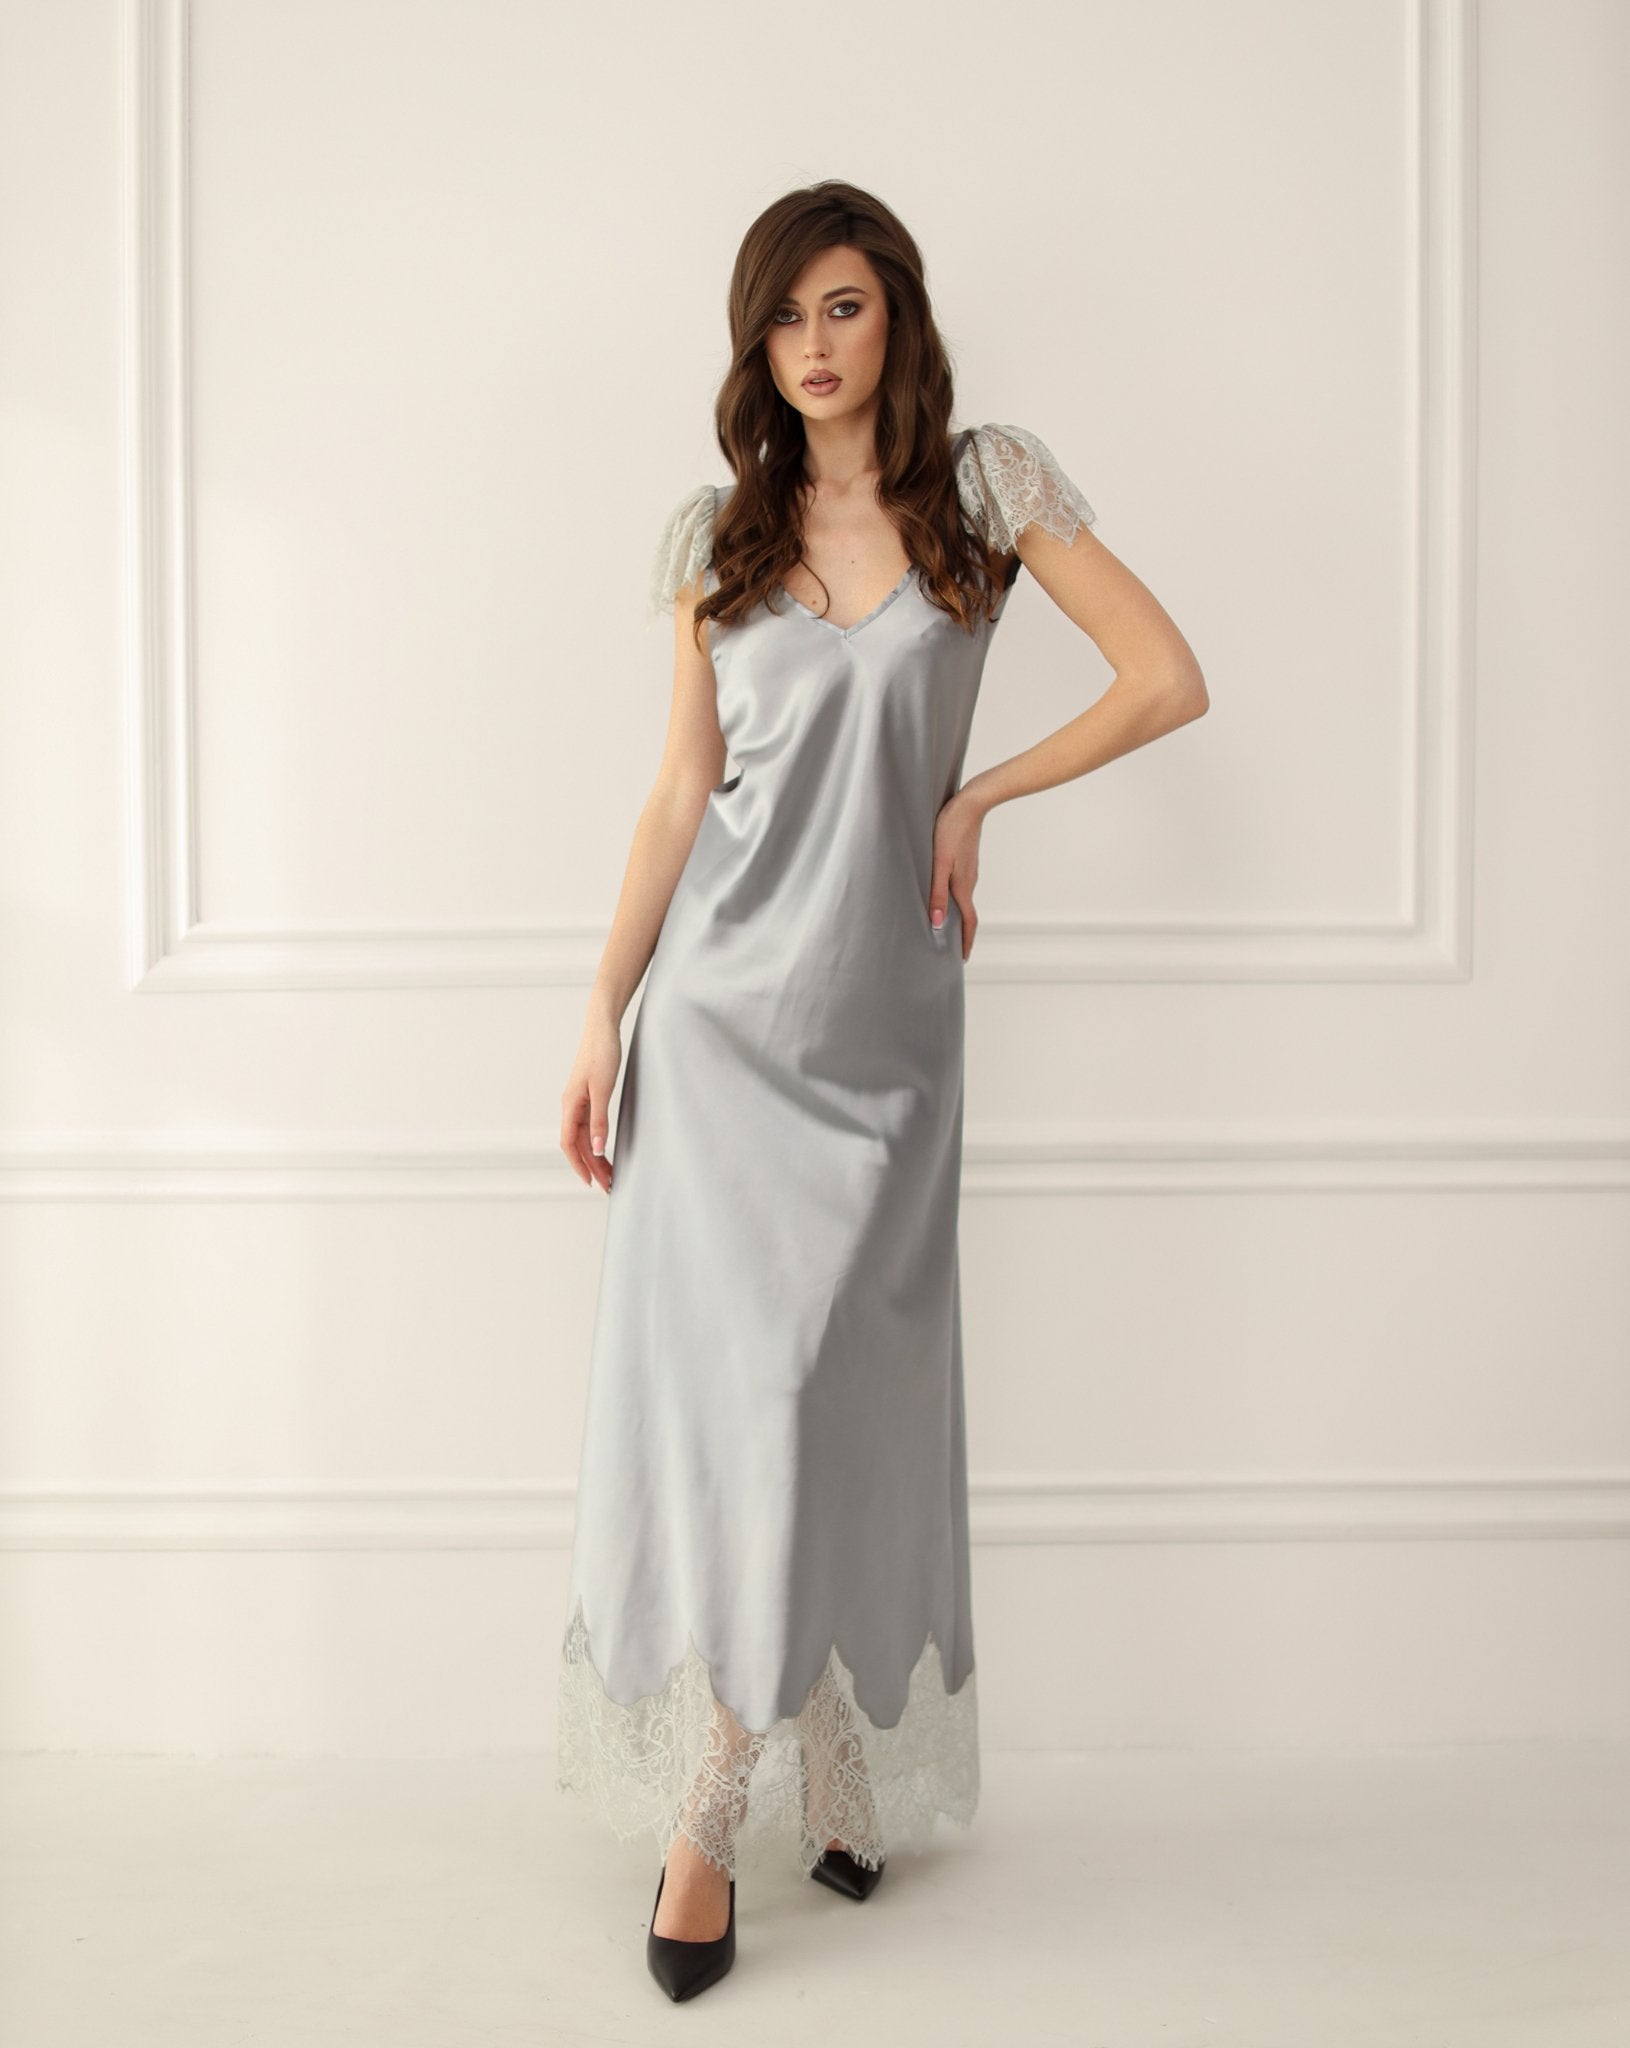 Nightgowns for women